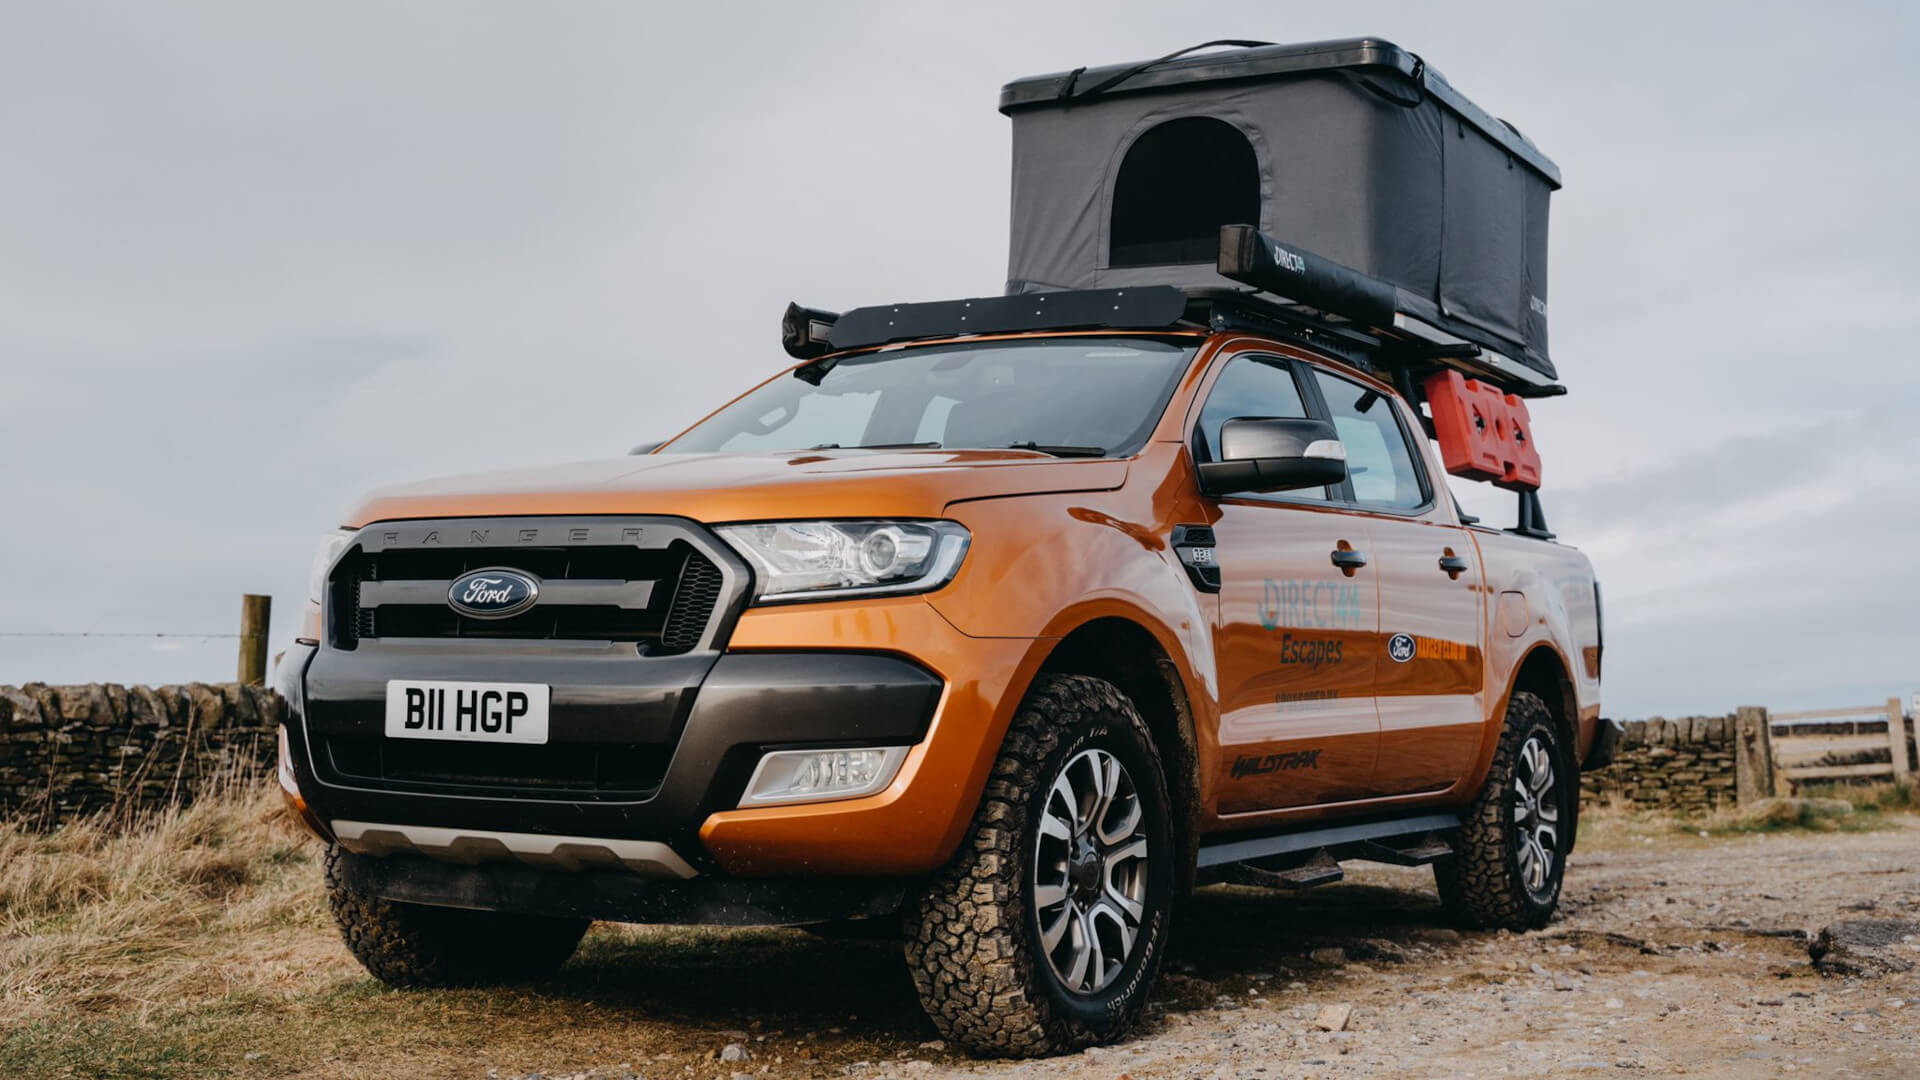 Direct4x4 overland expedition greenlaning outdoors nature offroad camping gear for 4x4s, SUVs, vans and pickuptrucks with a photo of a Ford Ranger Wildtrak in the peak district.